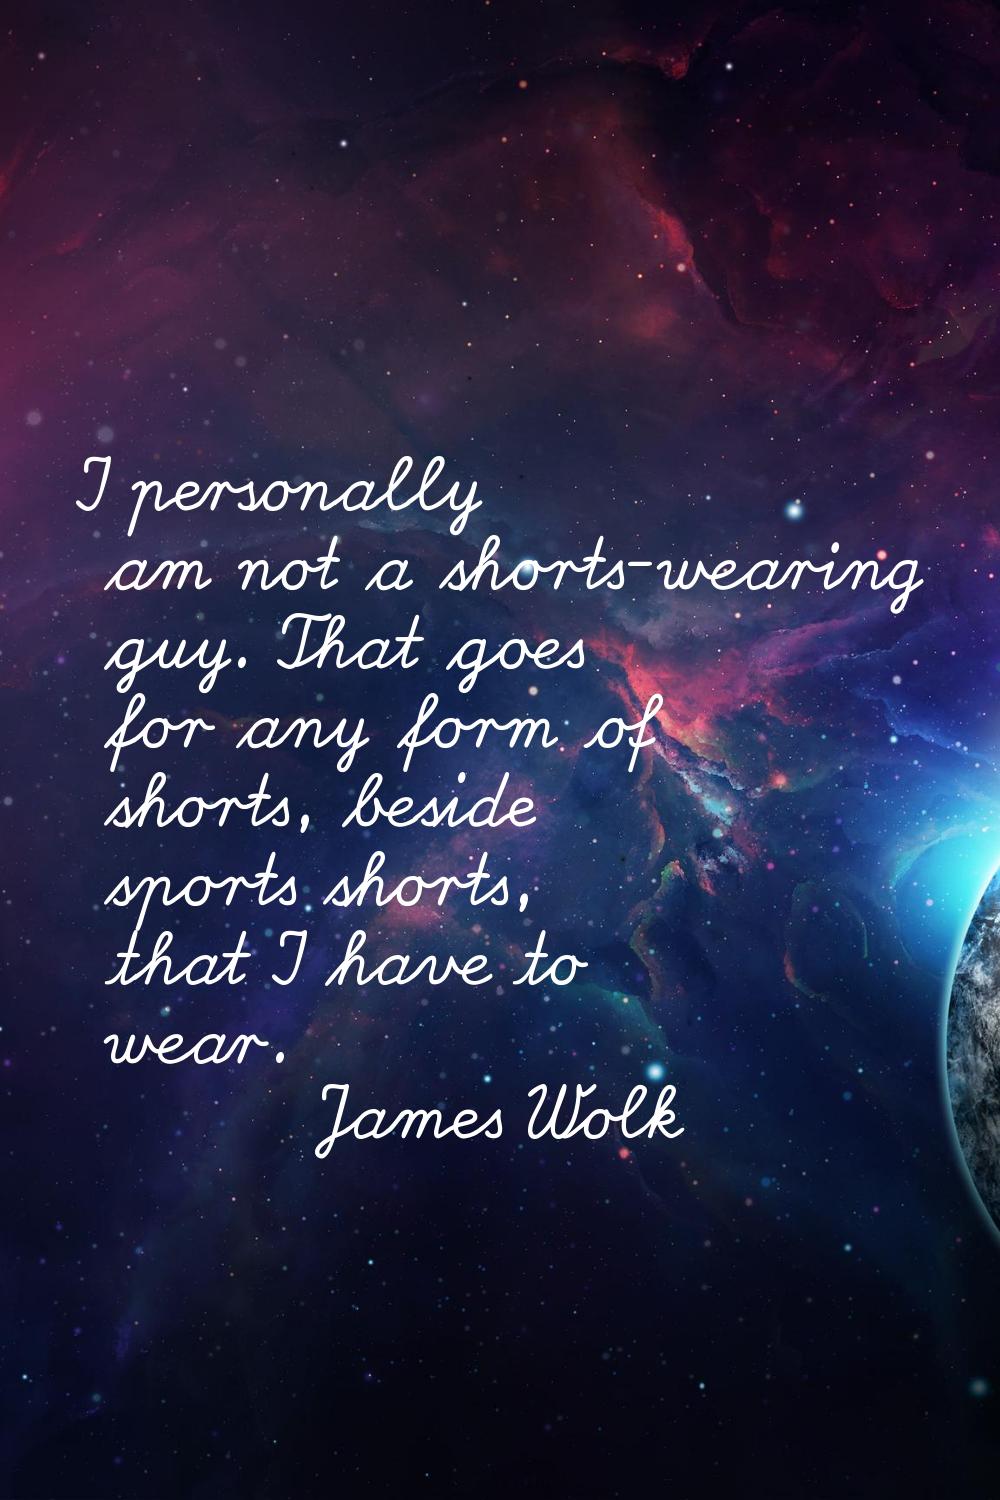 I personally am not a shorts-wearing guy. That goes for any form of shorts, beside sports shorts, t